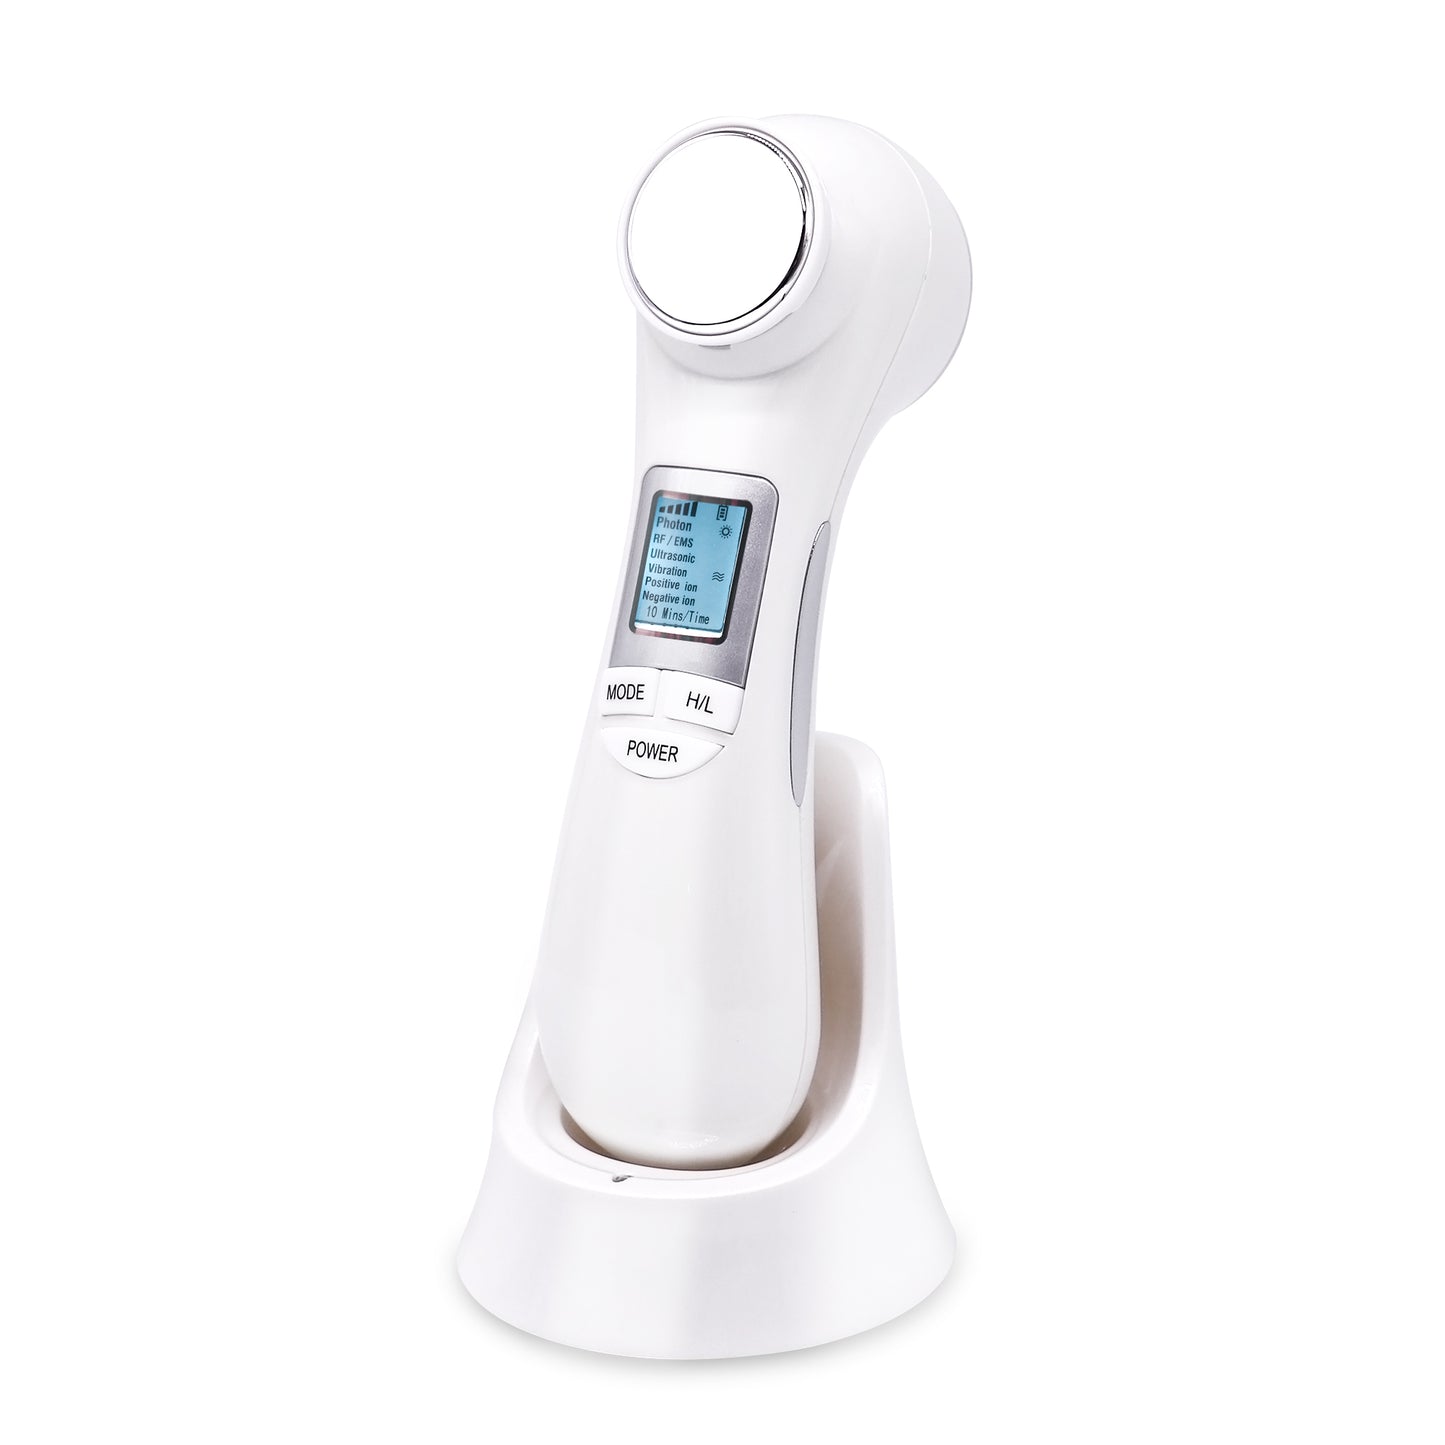 LED Skin Tightening Anti Wrinkle Facial Phototherapy Beauty Device